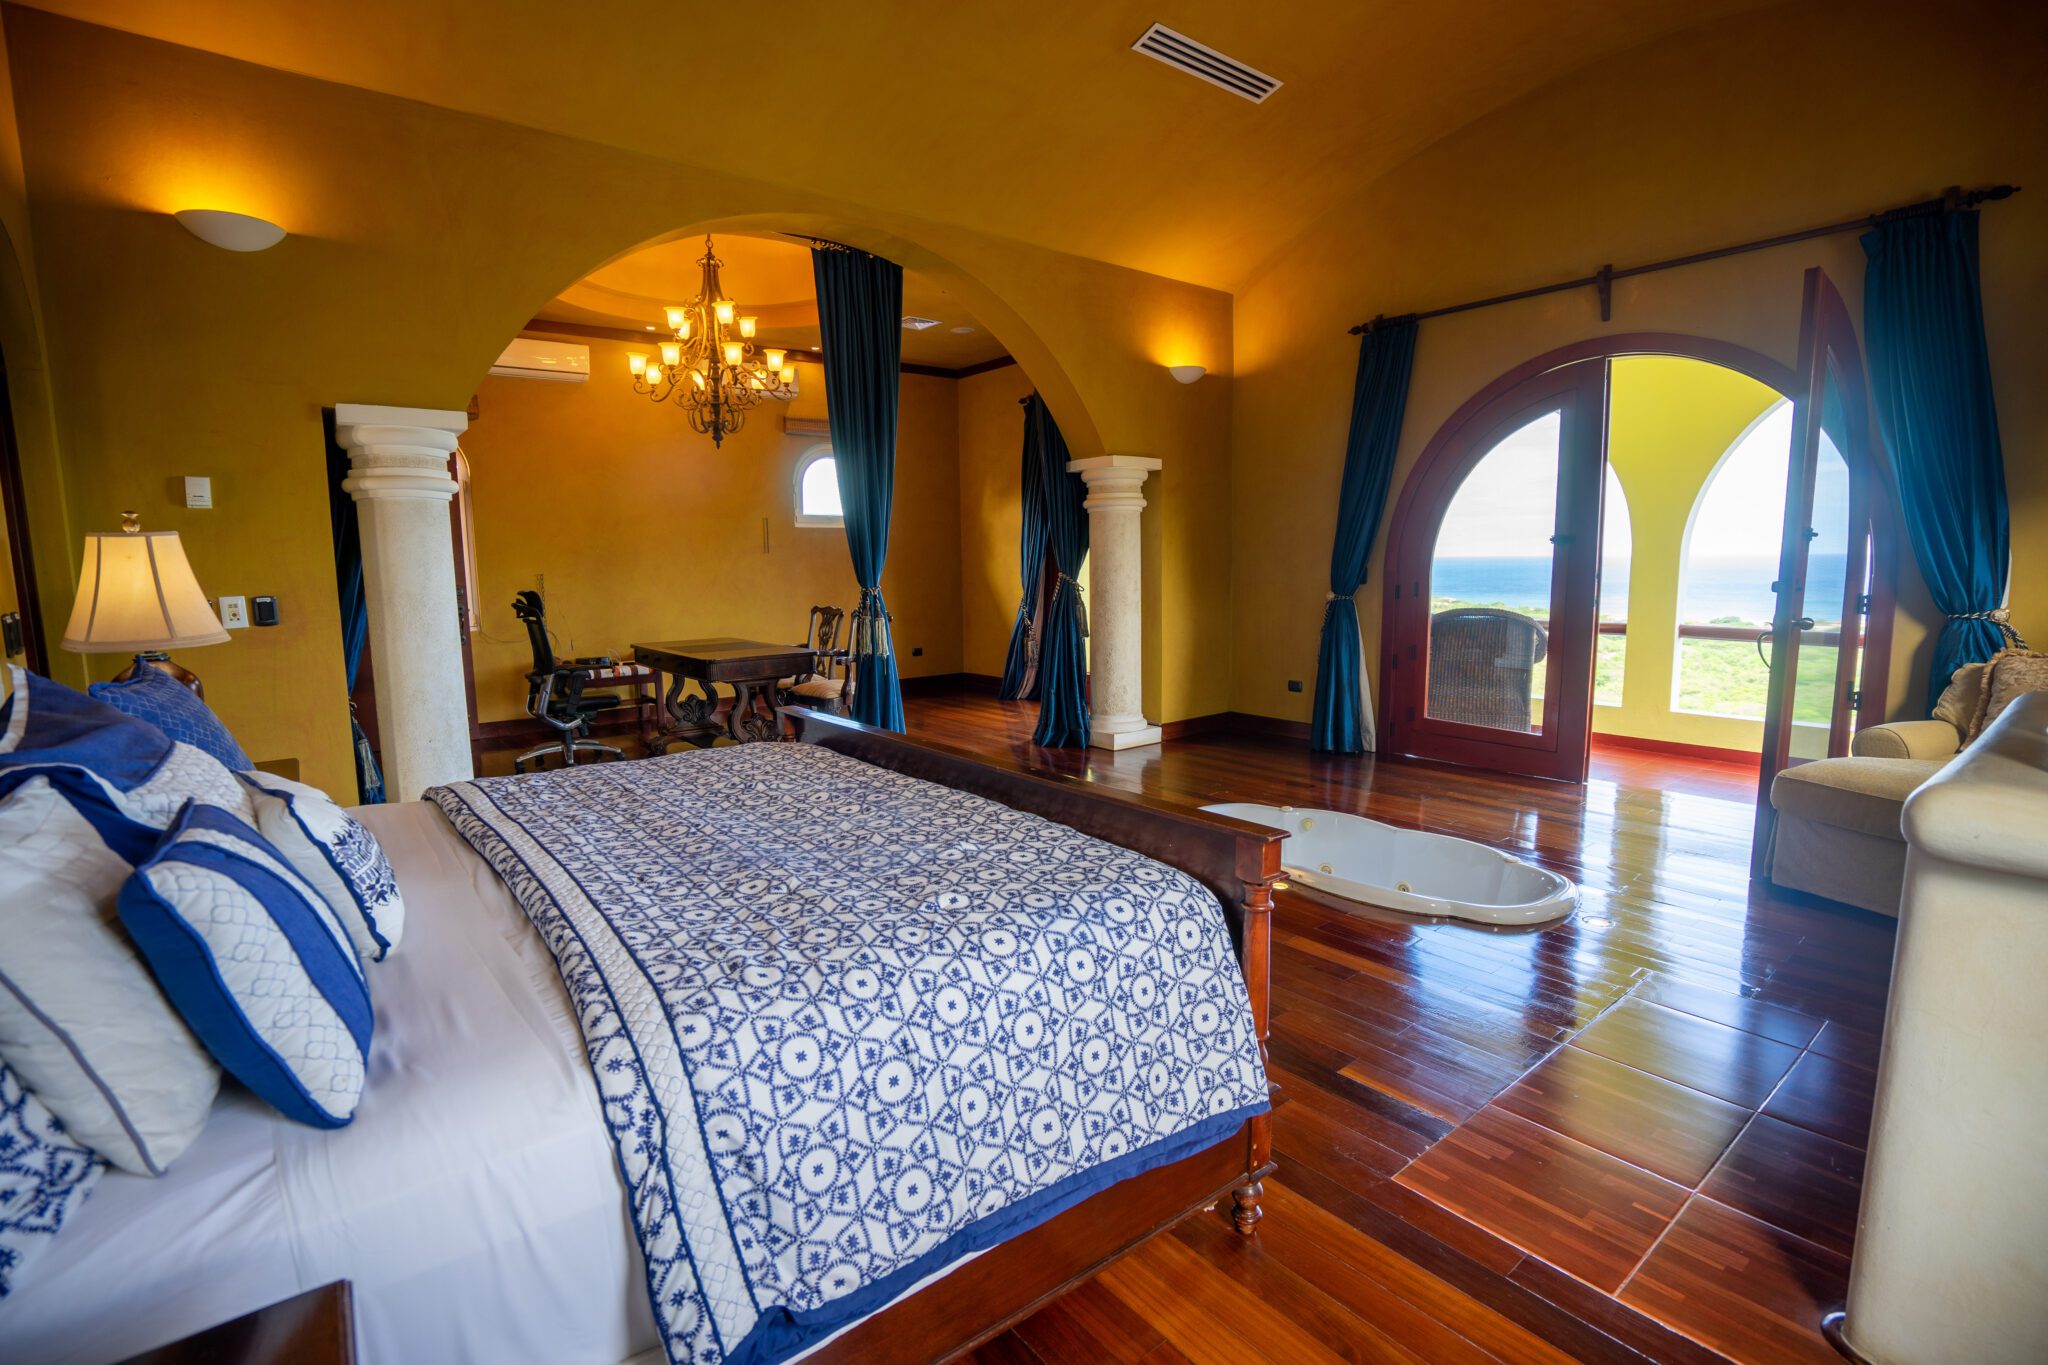 http://view%20of%20the%20room%20from%20a%20Rancho%20Santana%20Property%20for%20Sale%20in%20Nicaragua%20R3